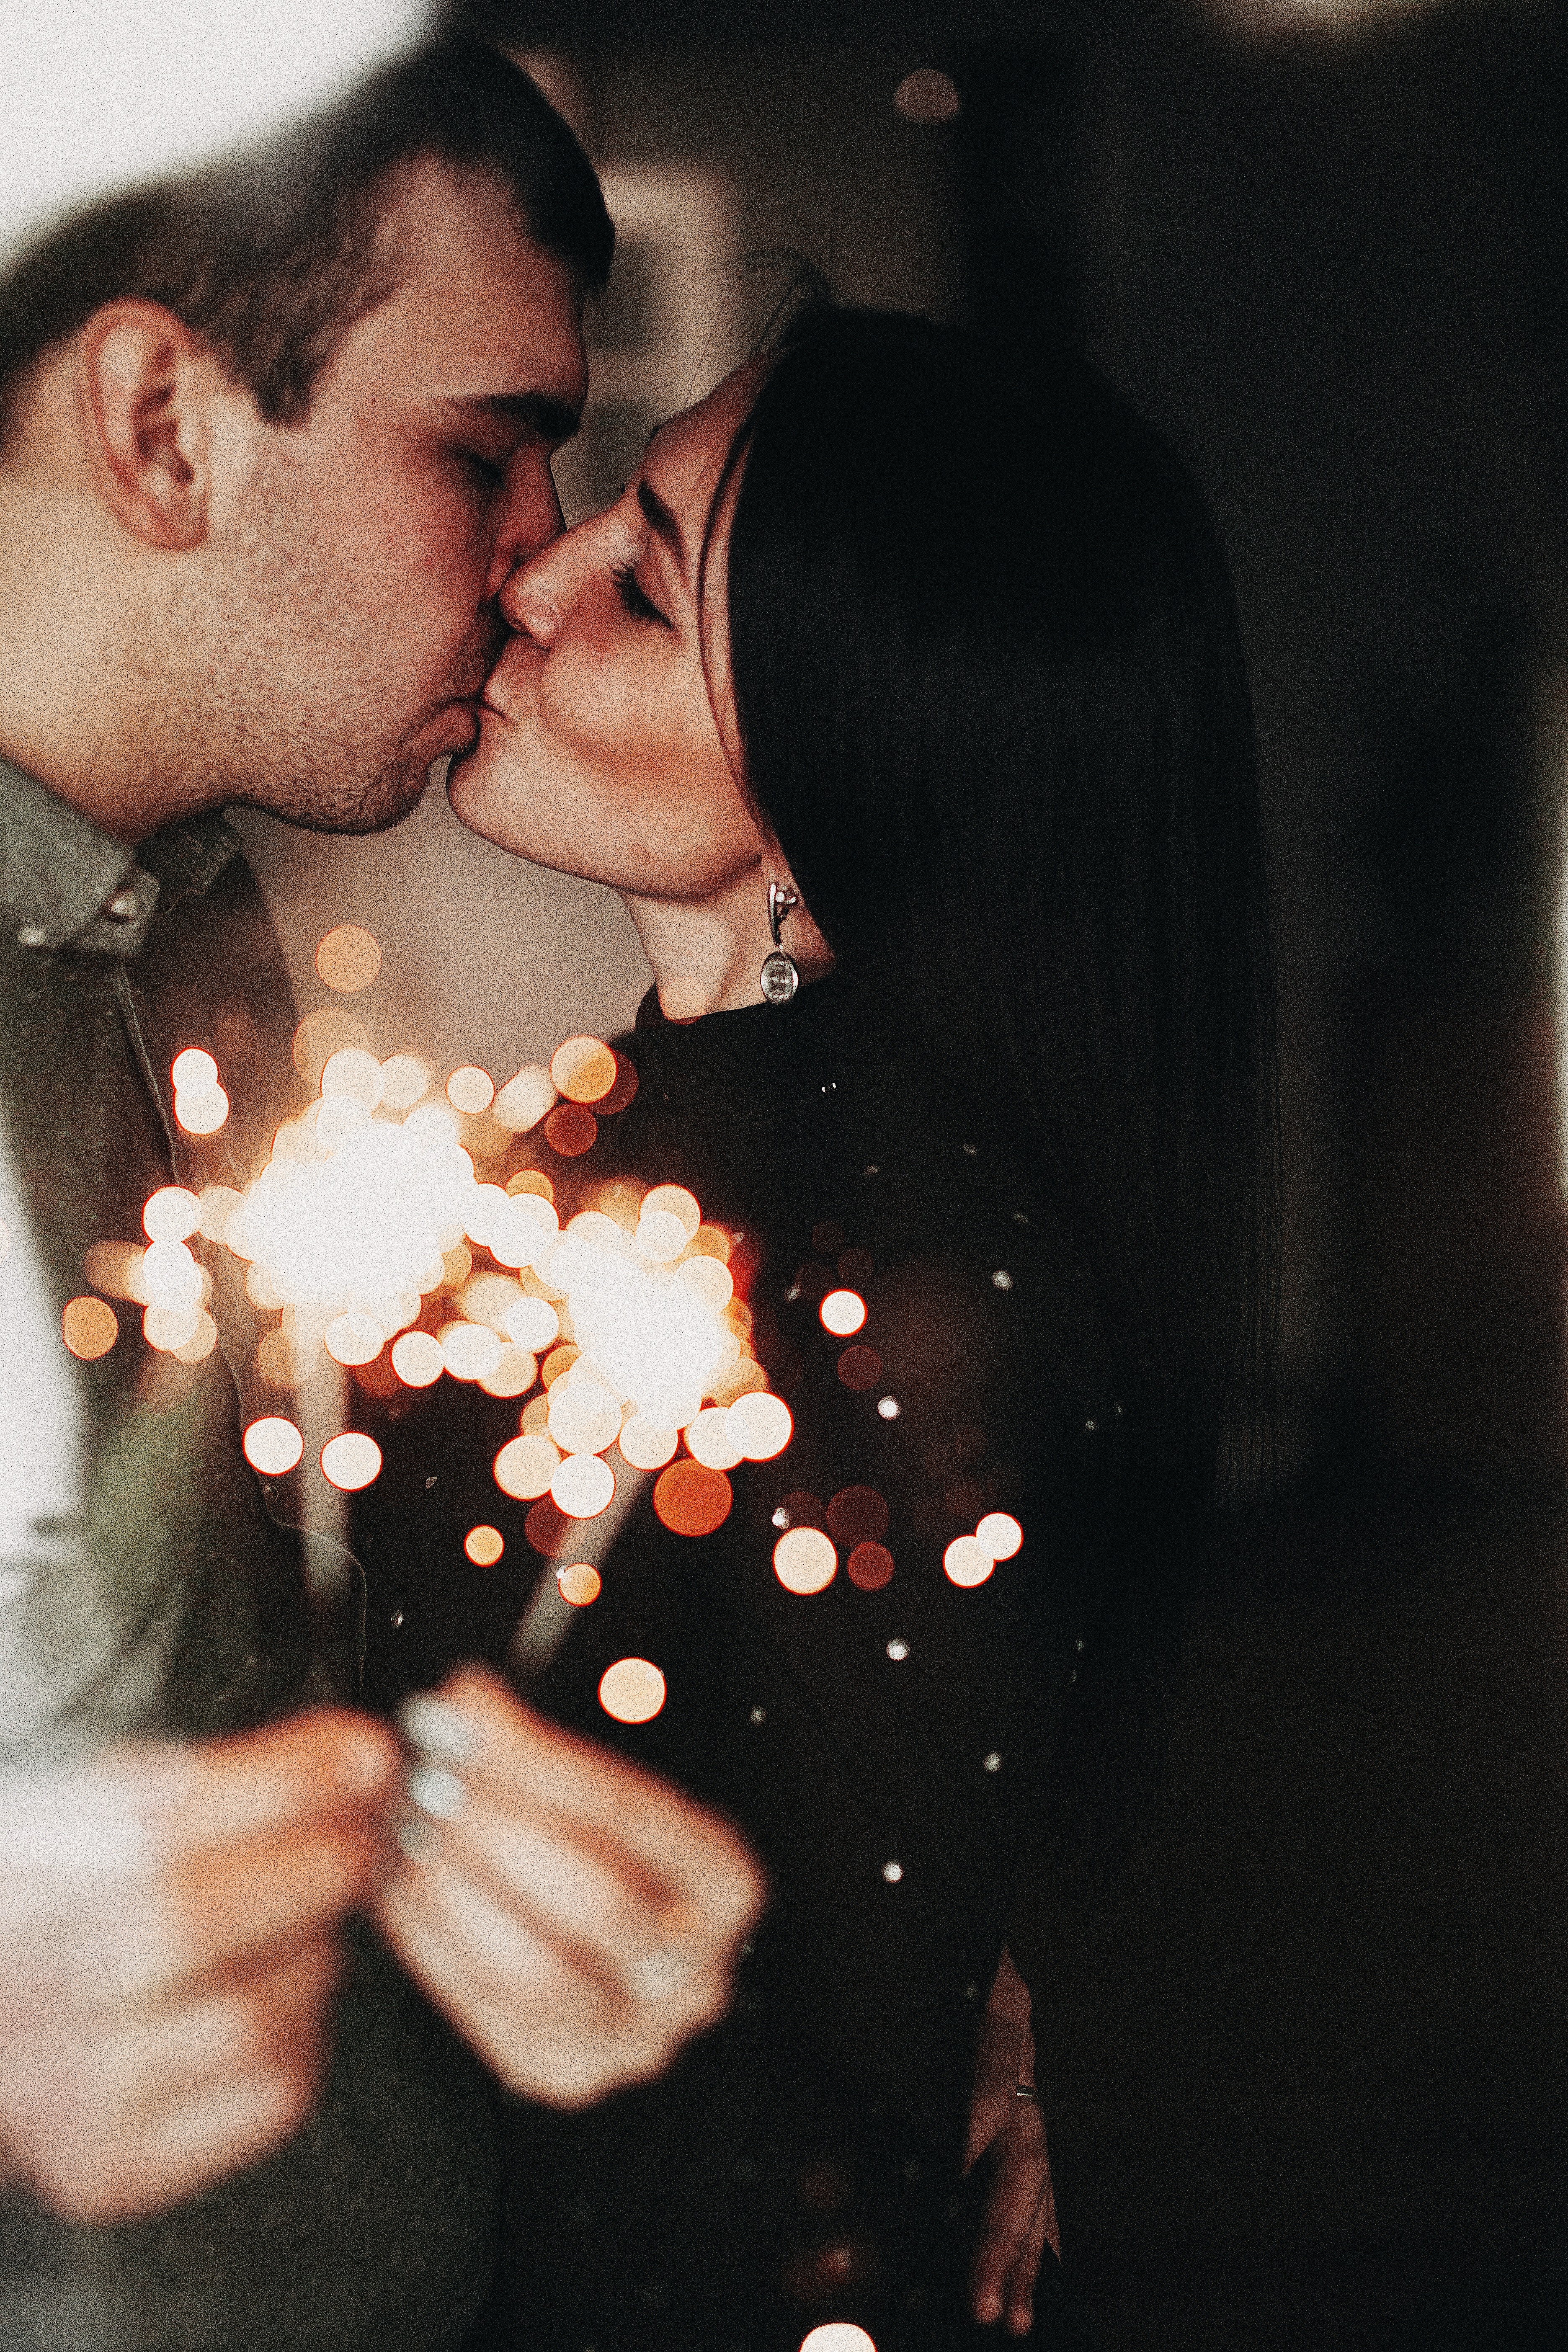 A couple holding sparklers while kissing. | Source: Pexels